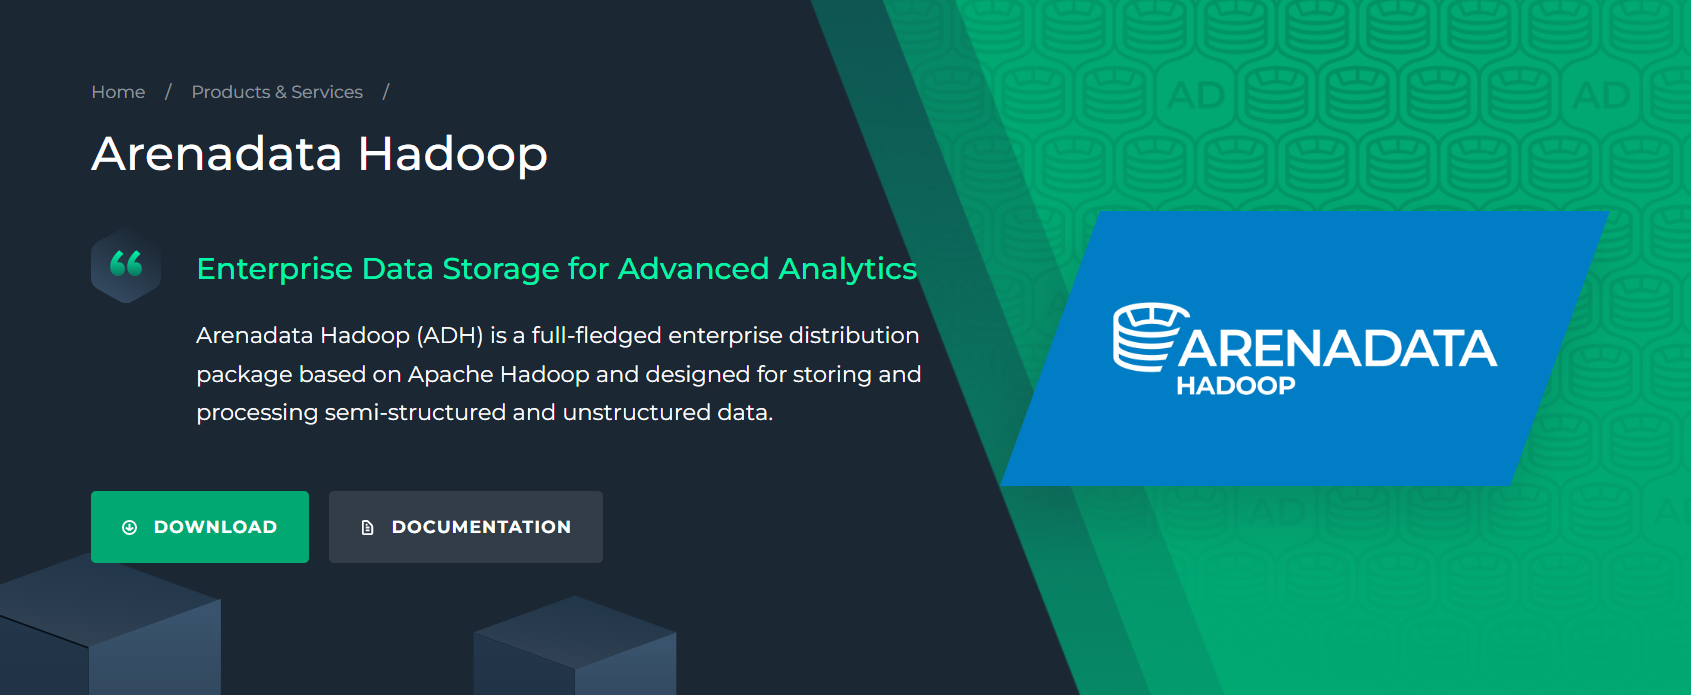 Switch to the Arenadata Hadoop download page